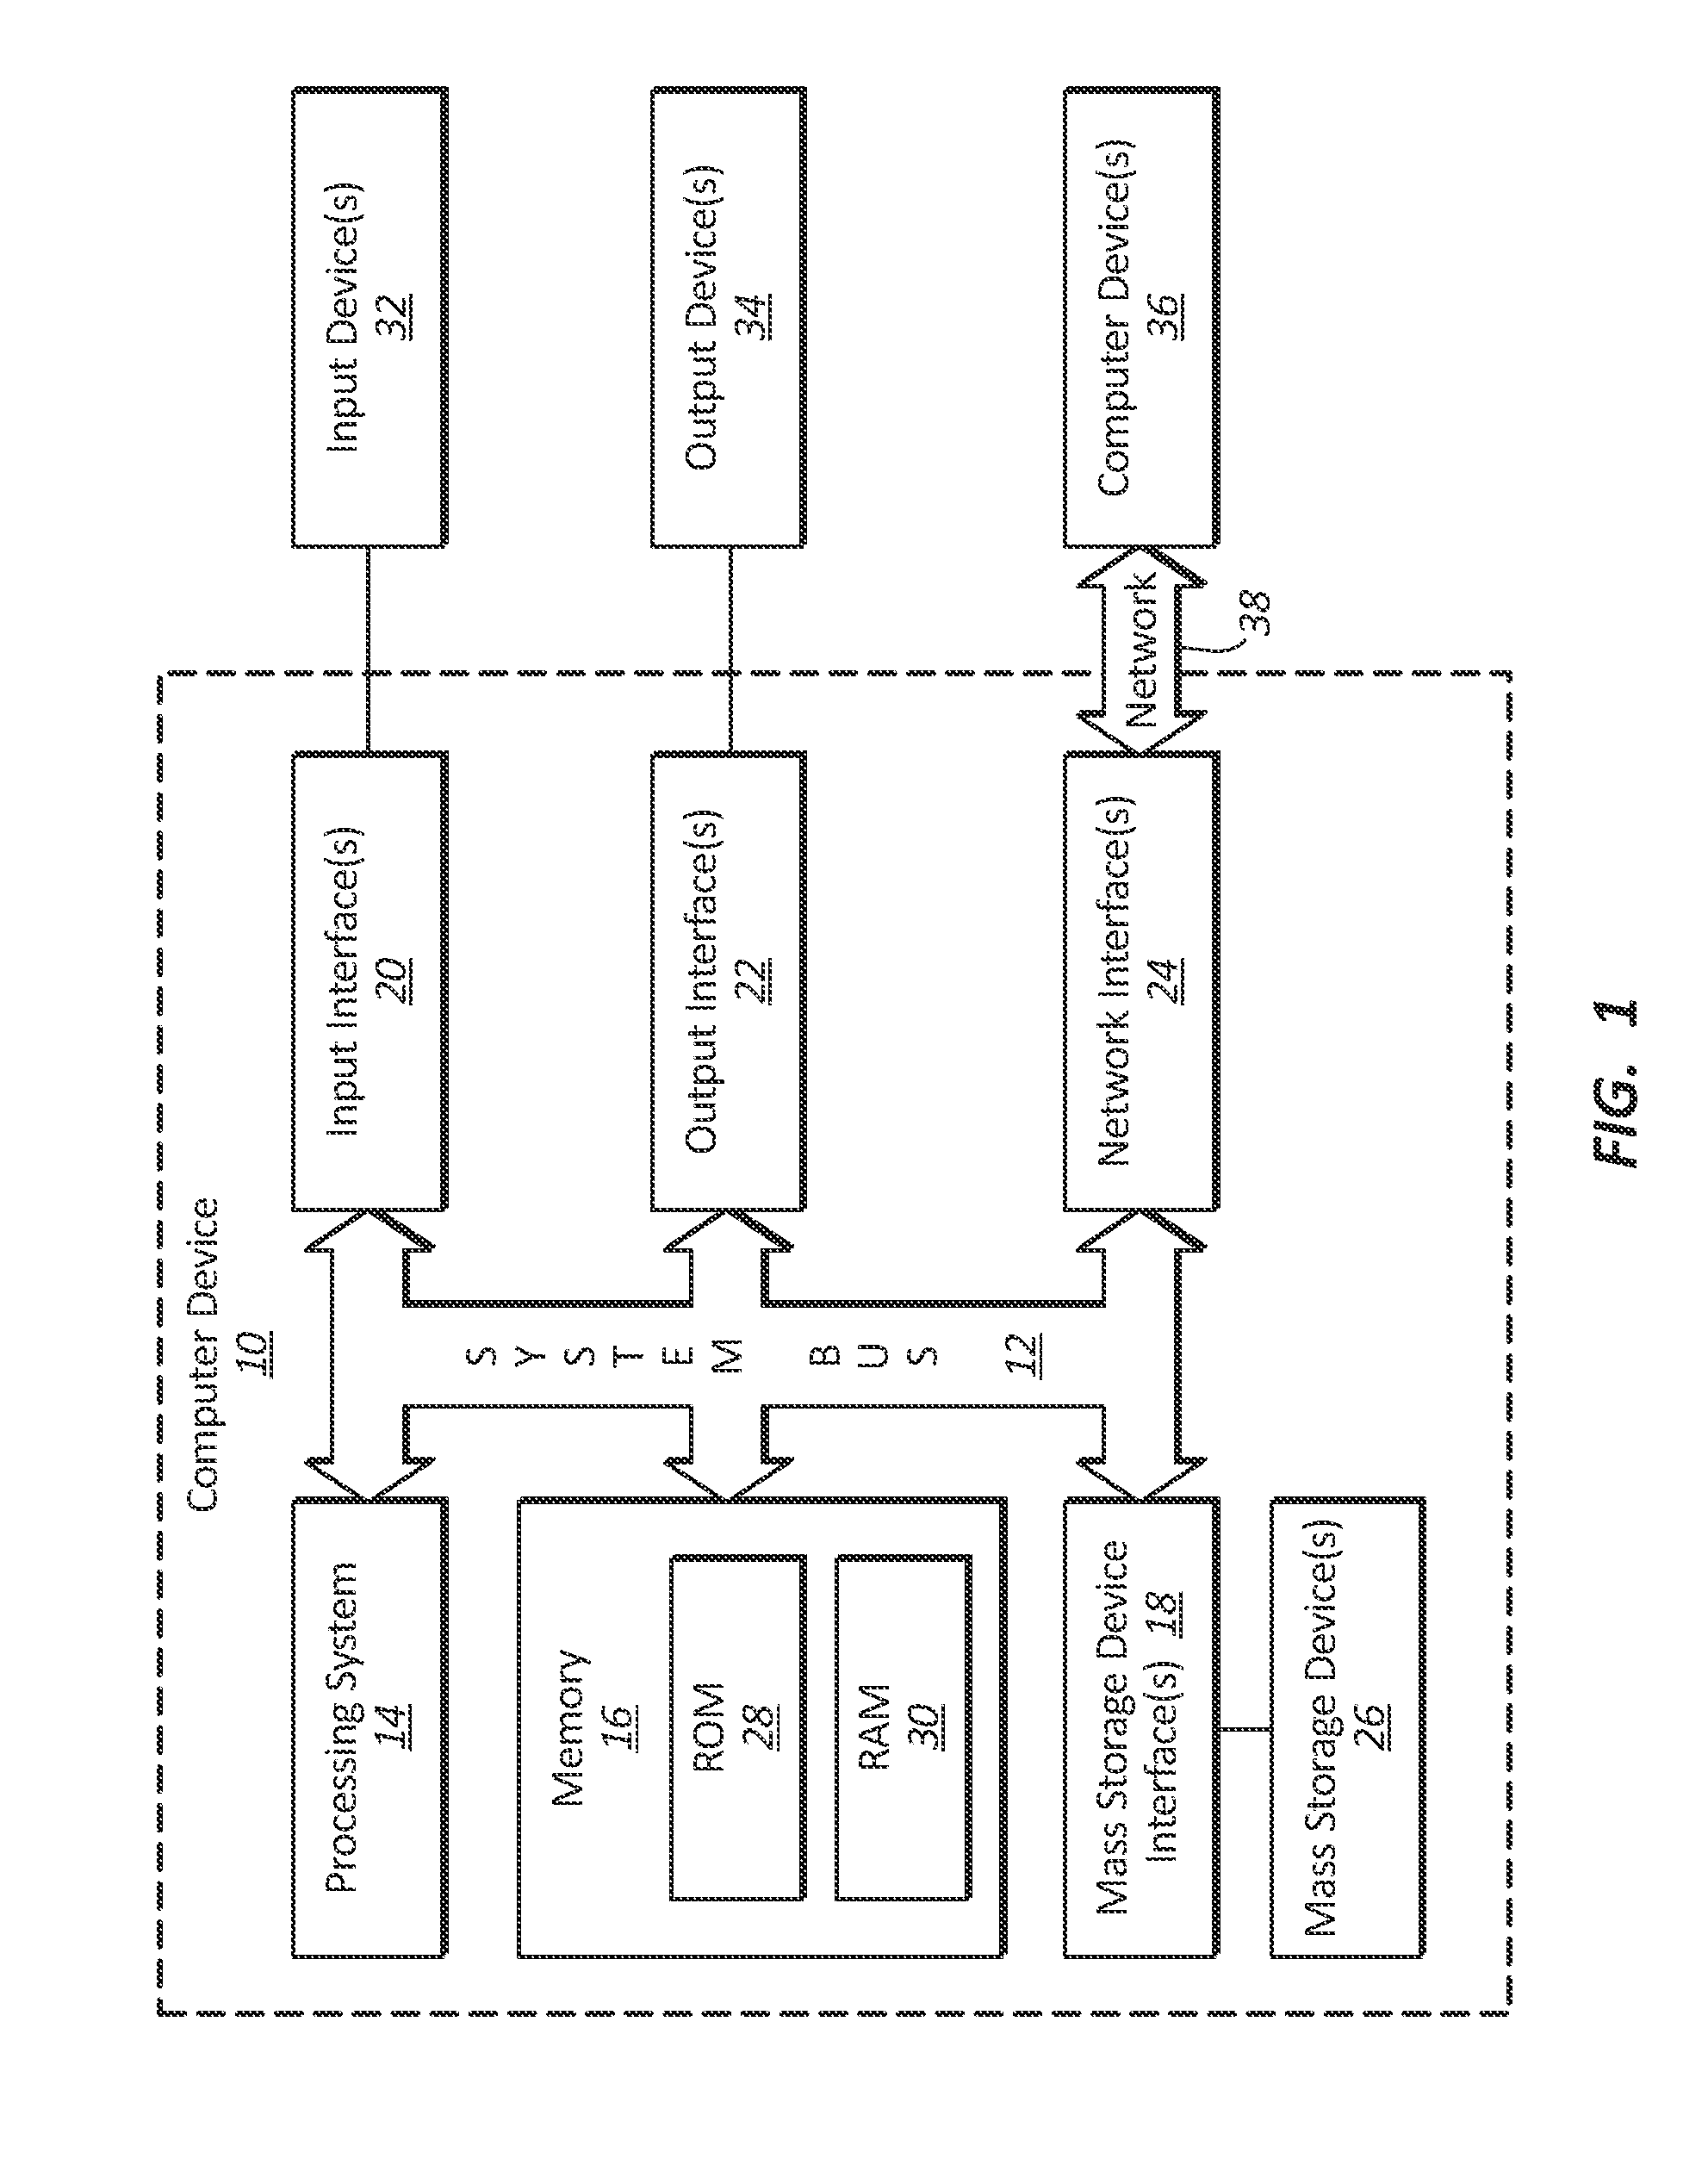 Systems and methods for monitoring the use of medications